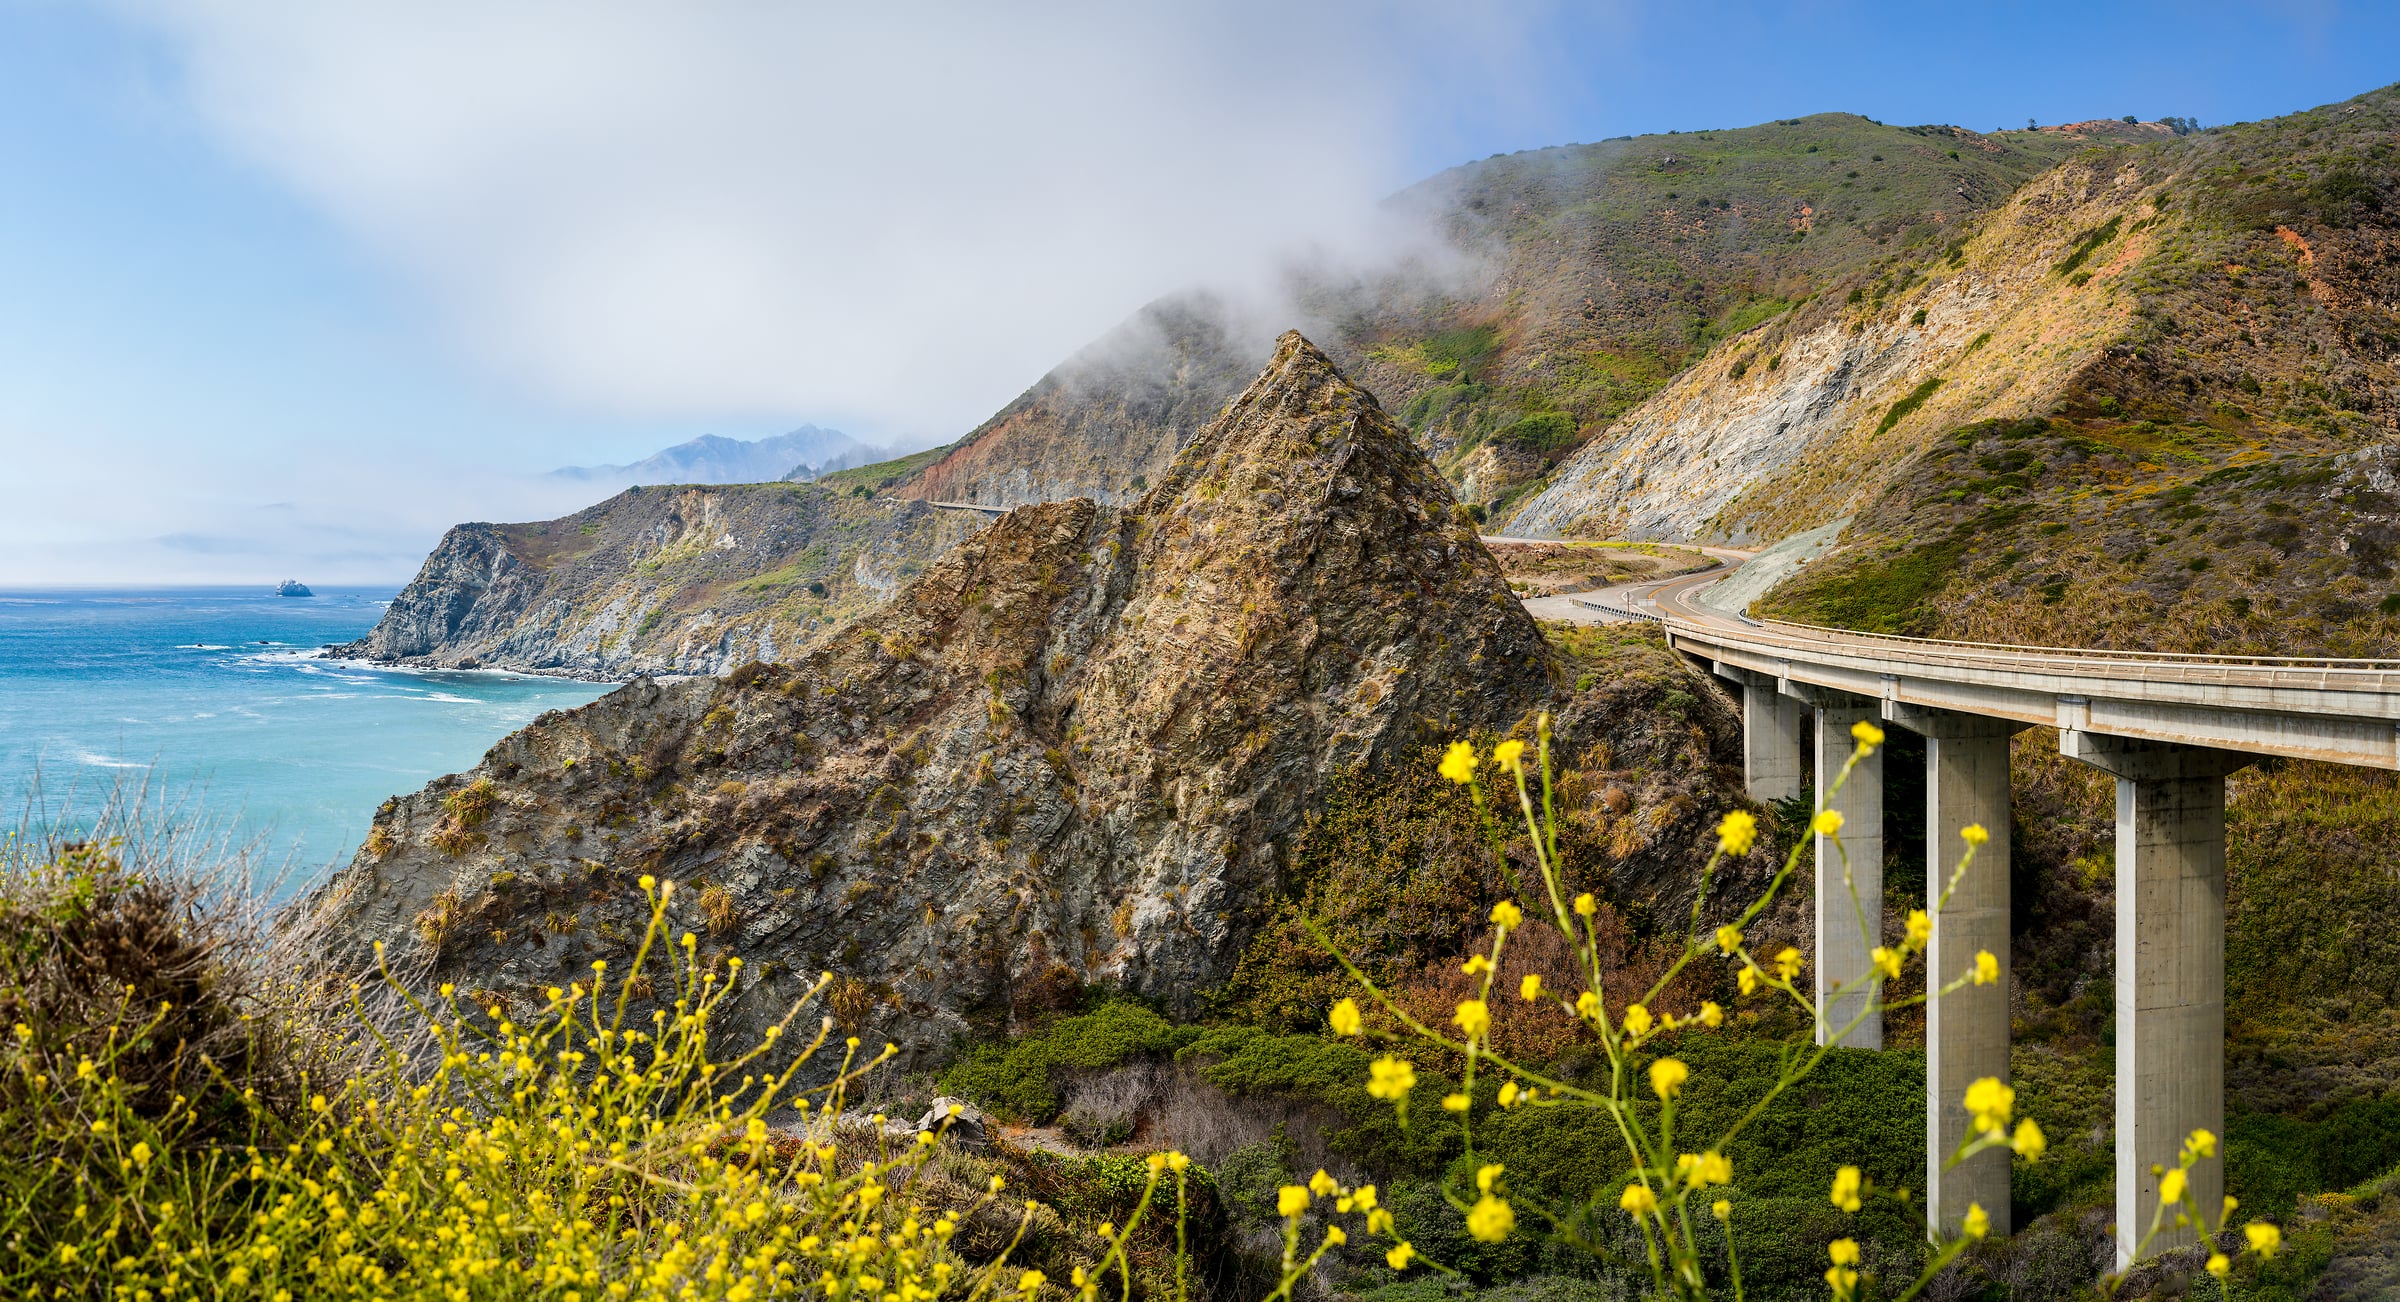 185 megapixels! A very high resolution, large-format VAST photo print of Big Sur Coast Highway; photograph created by Jeff Lewis in Big Sur, California.